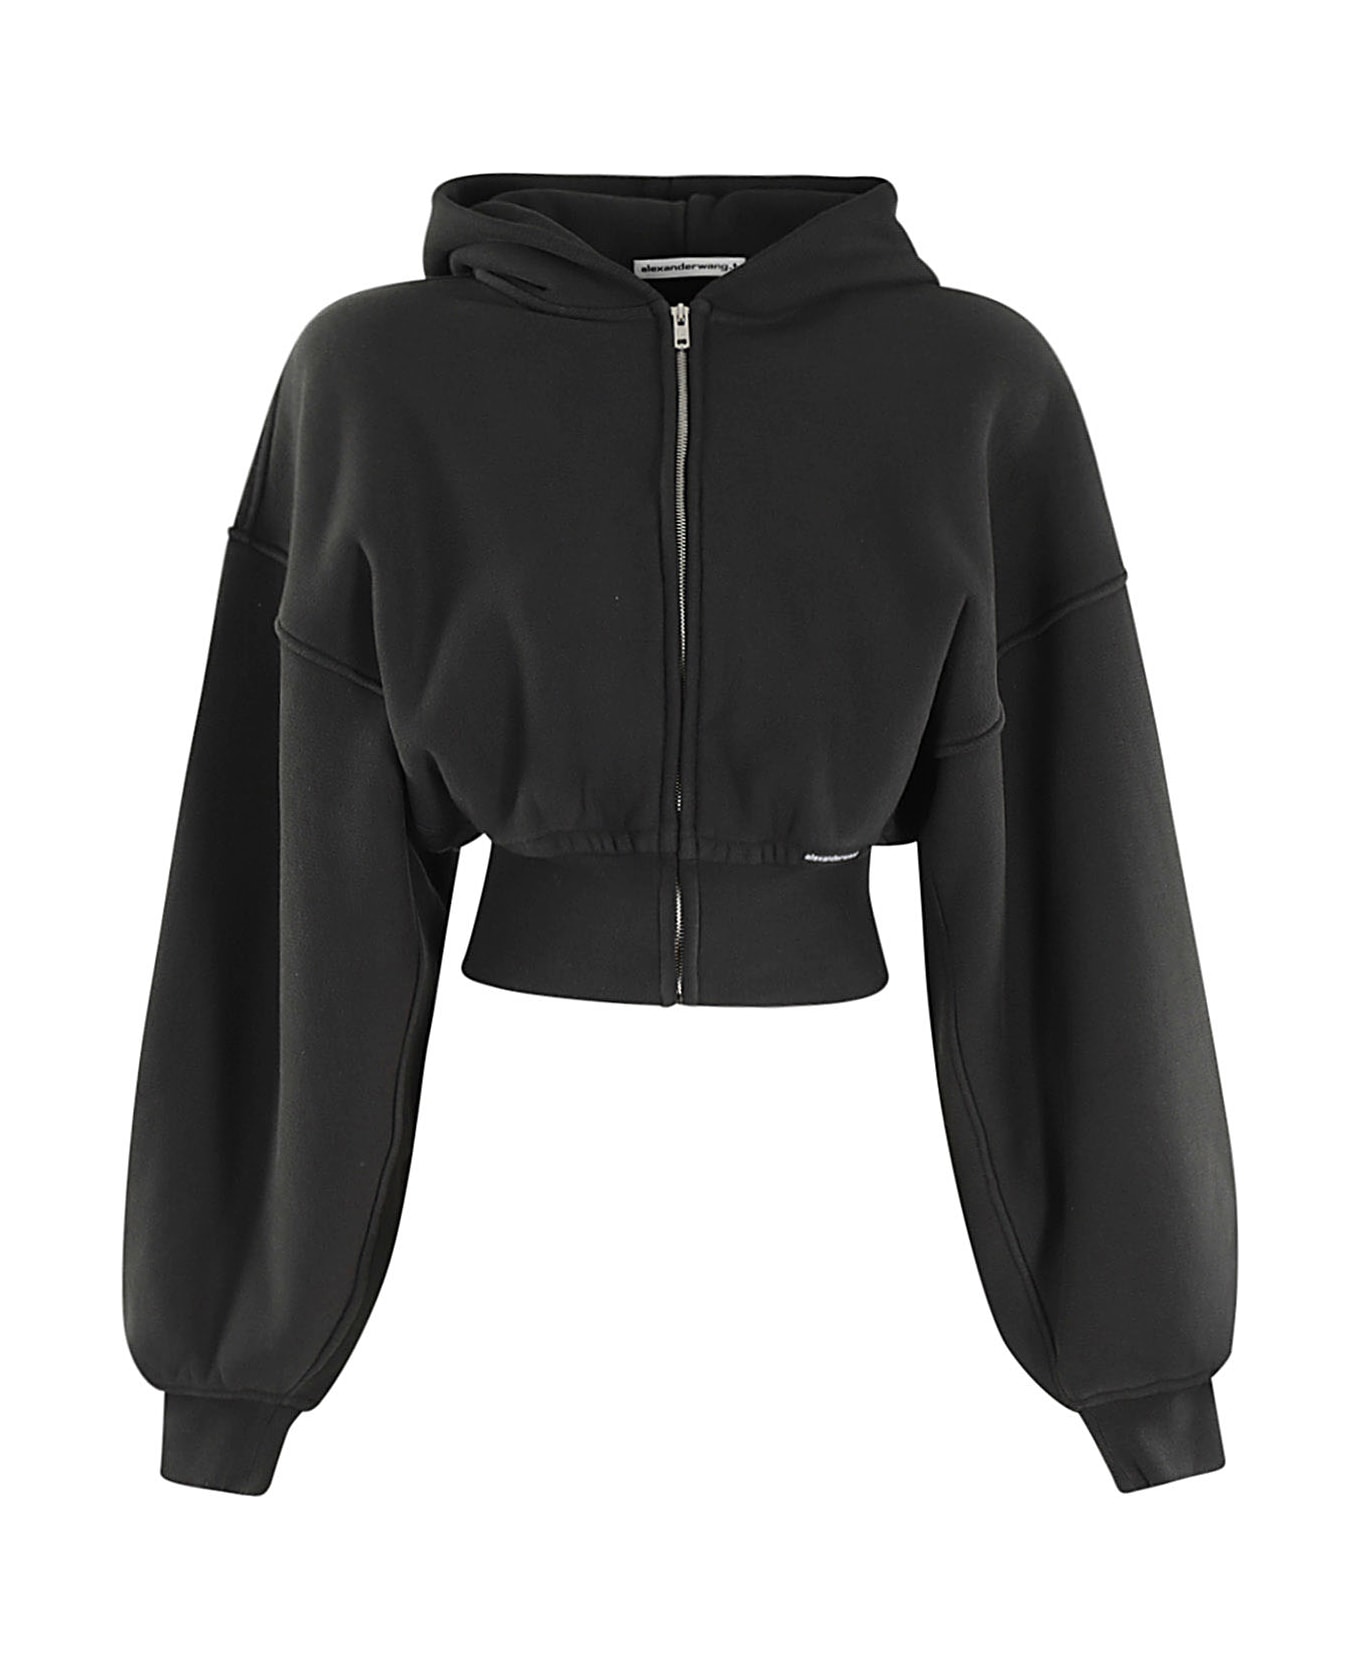 T by Alexander Wang Cropped Zip Up Hoodie - A